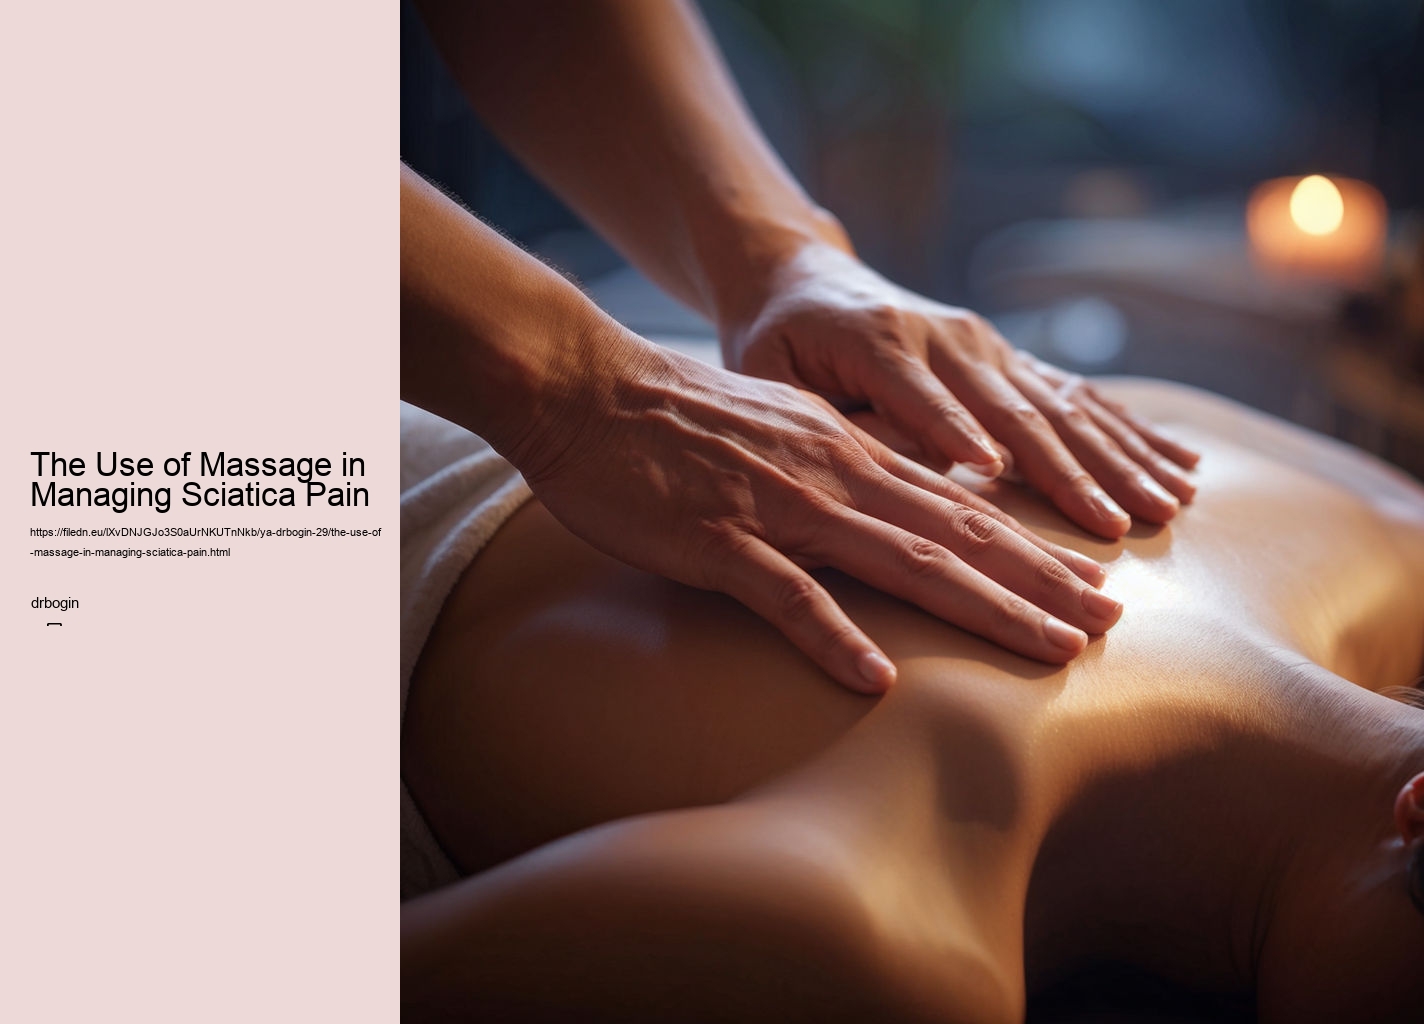 The Use of Massage in Managing Sciatica Pain